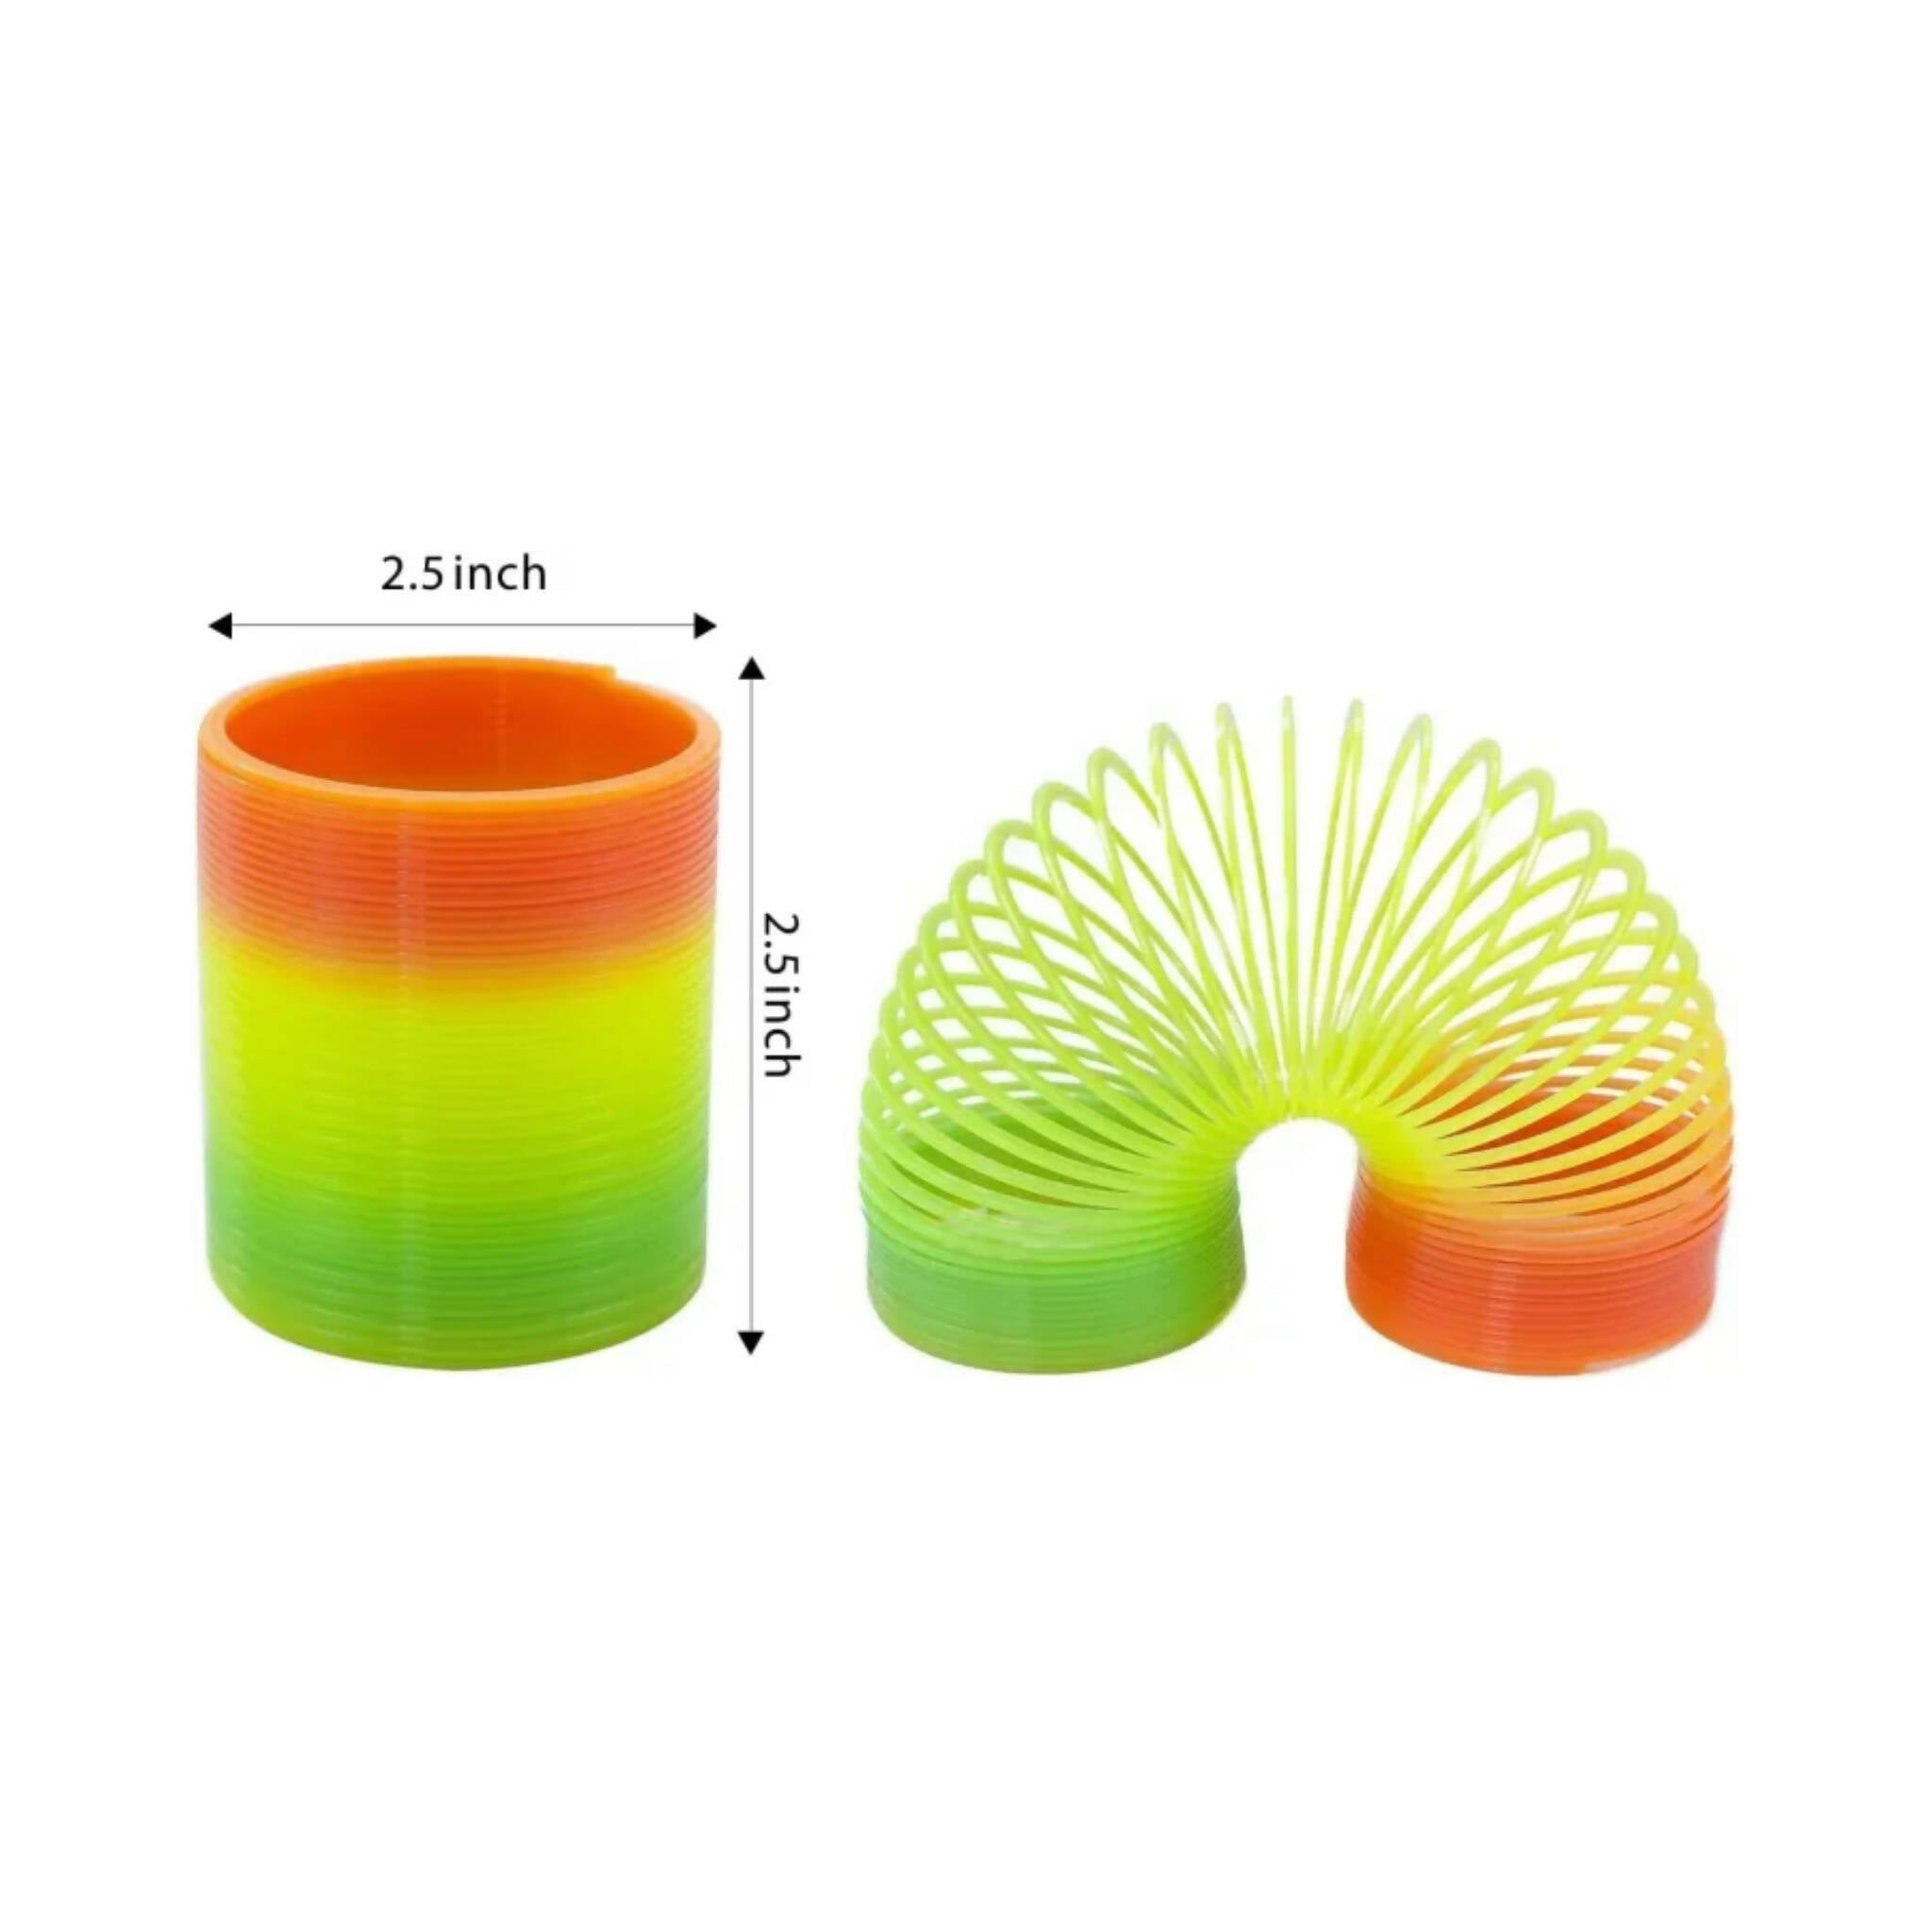 Colorful Rainbow Spring Toy, Endless Fun, for Kids'